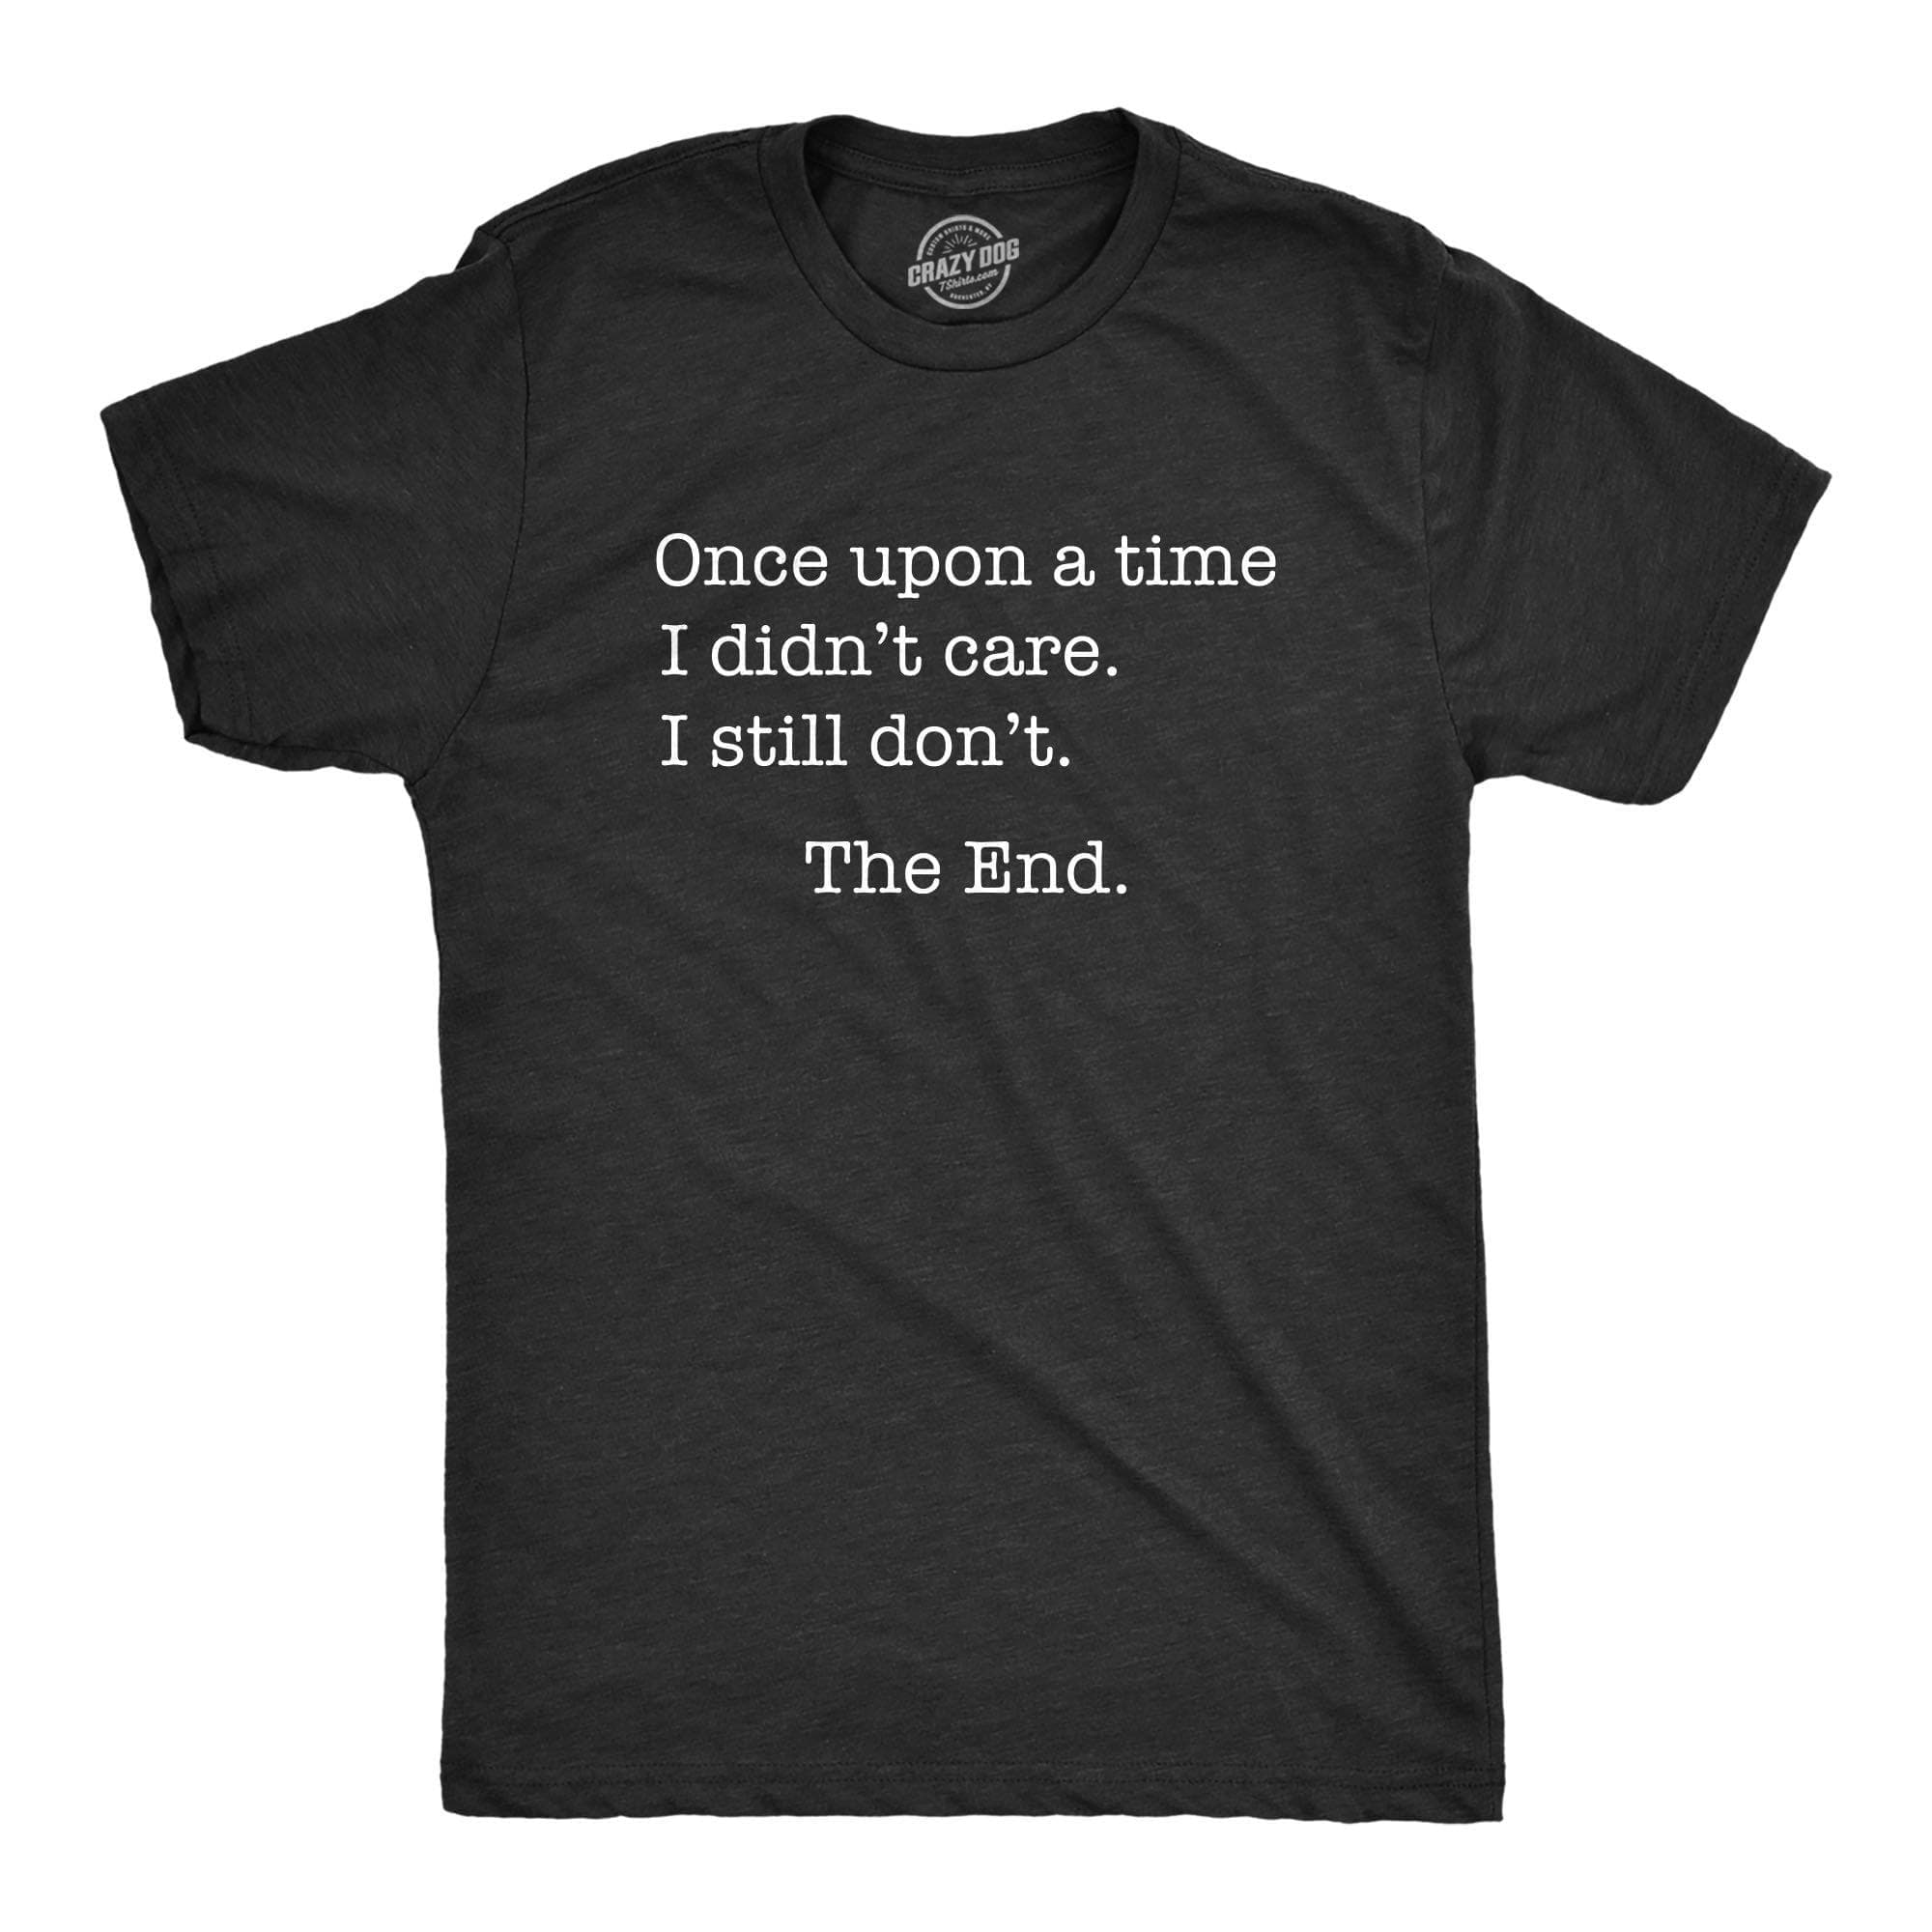 Once Upon A Time I Didn't Care Men's Tshirt  -  Crazy Dog T-Shirts